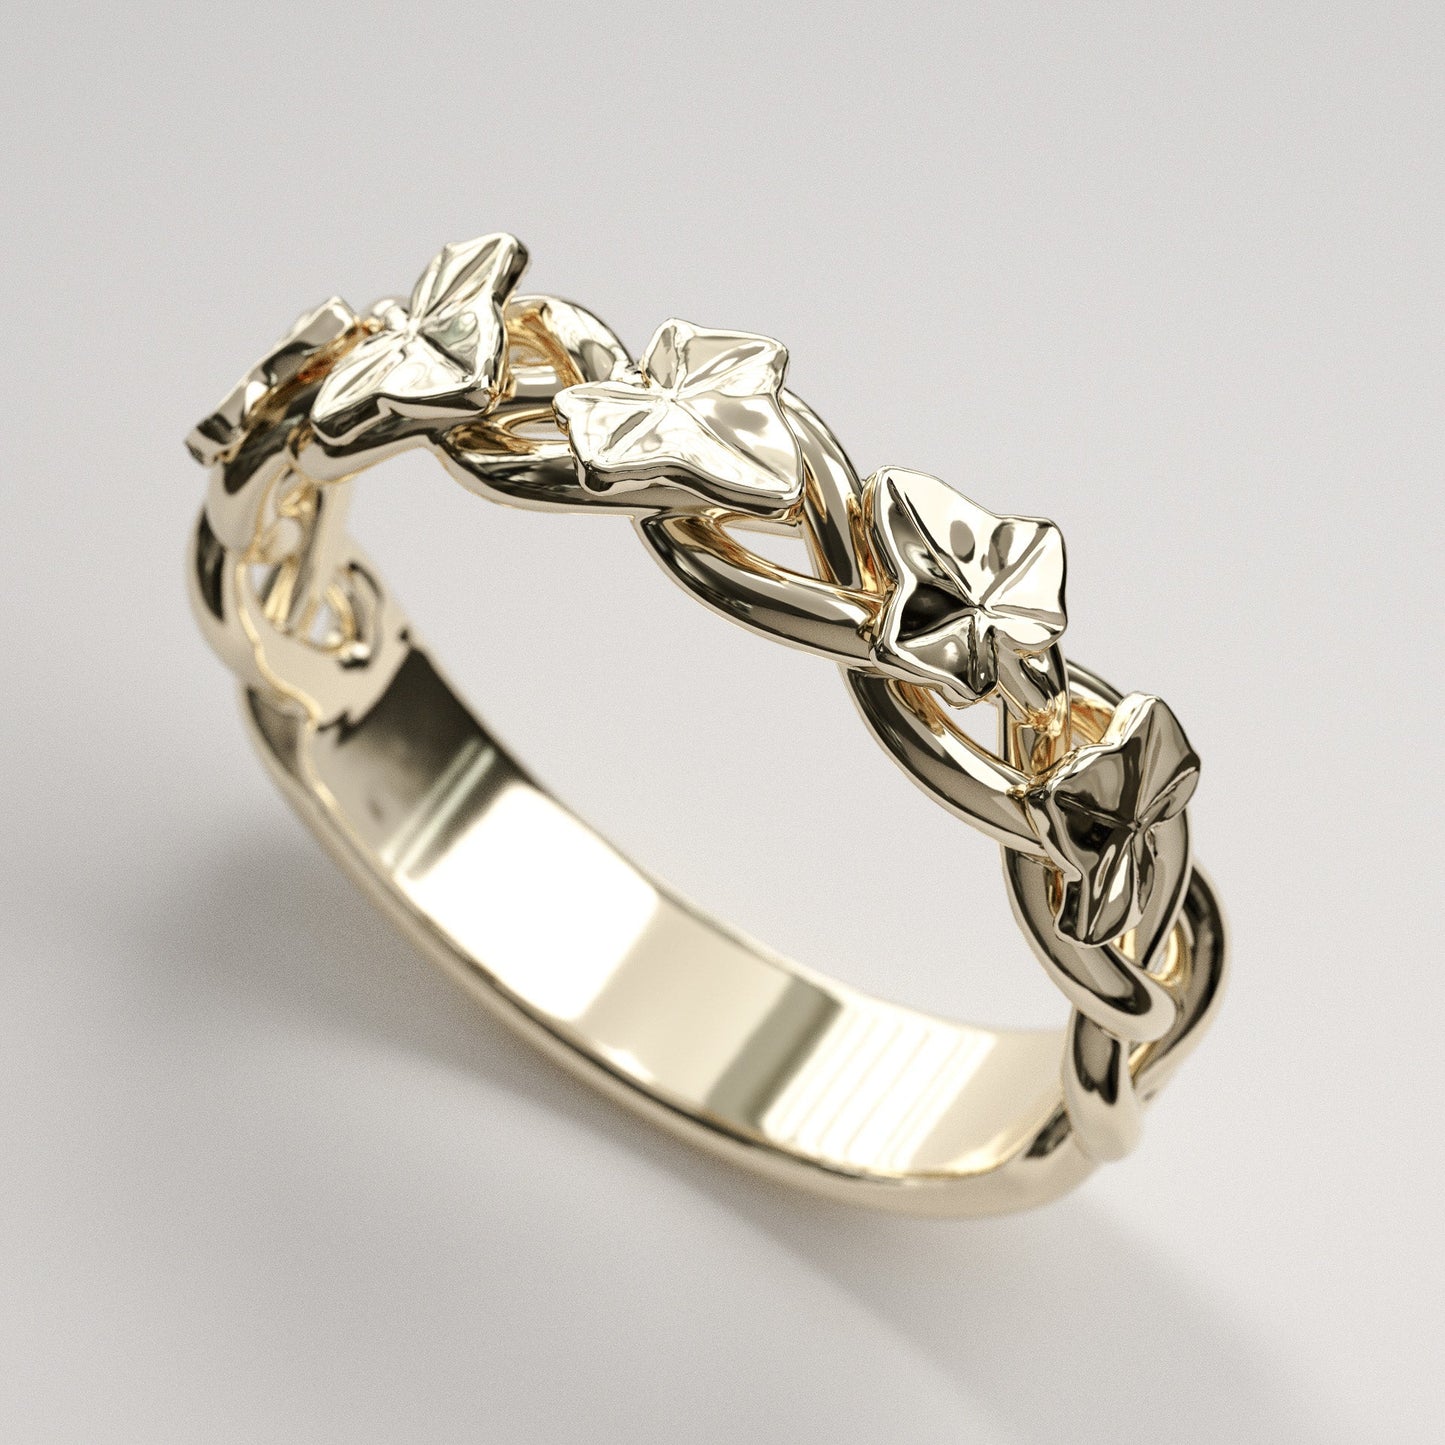 Woven Ivy leaf ring in gold